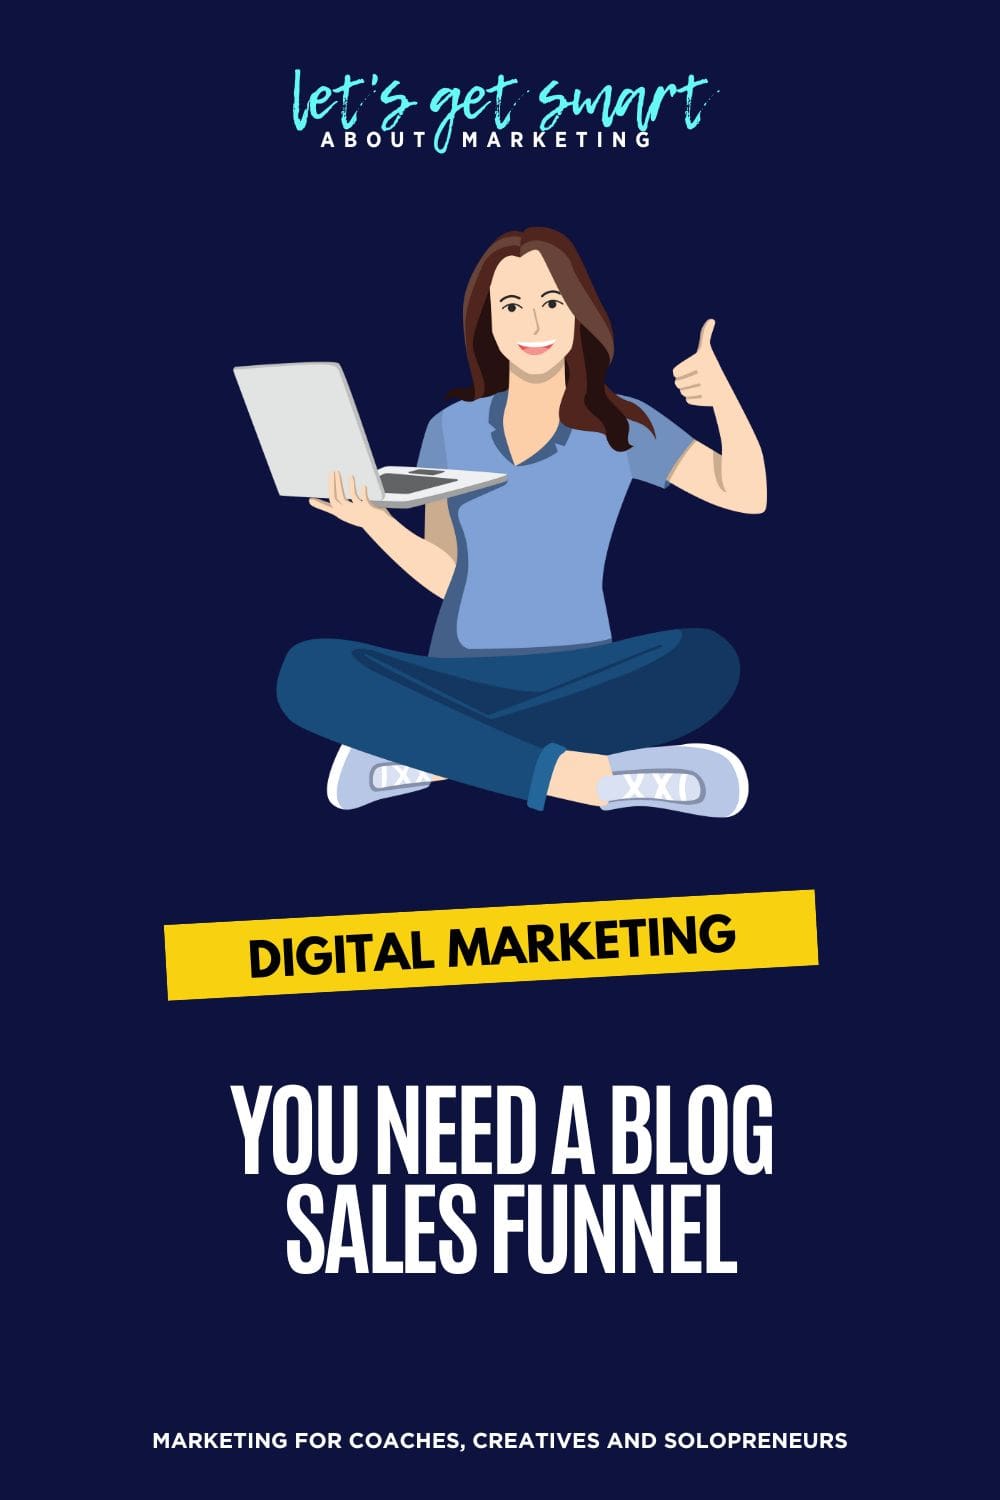 Maximizing Your Blog Sales Funnel A Step-by-Step Guide